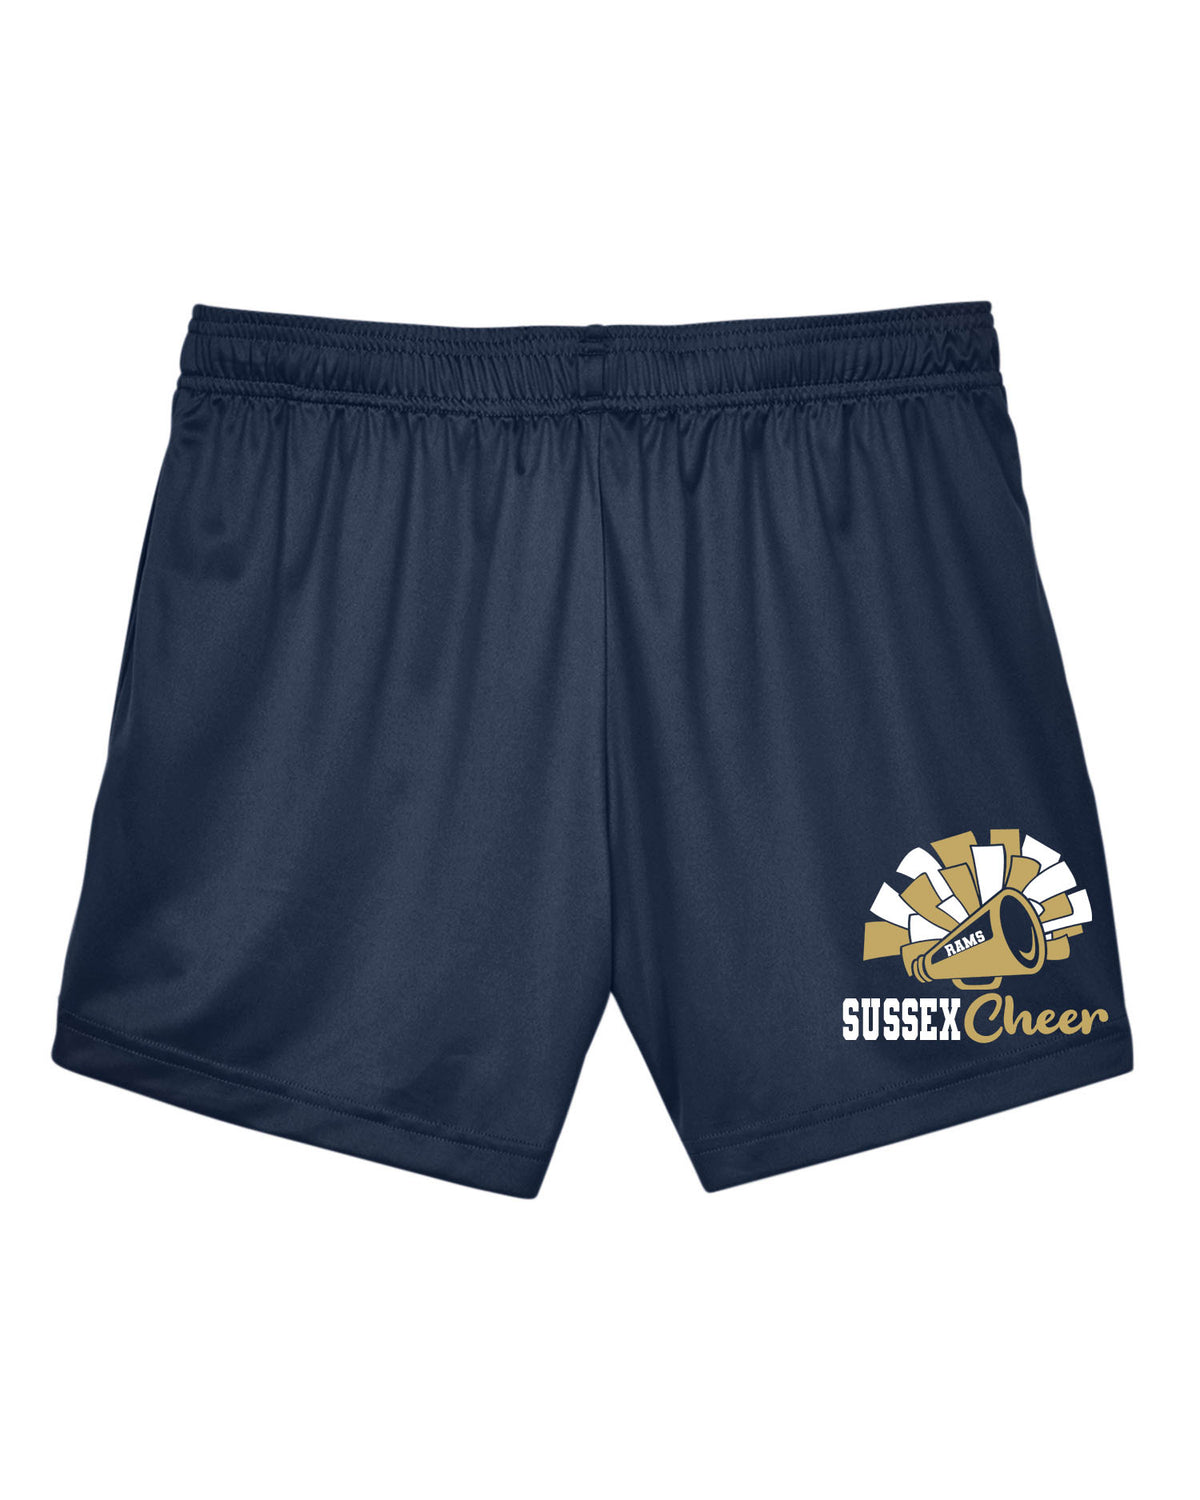 Sussex Middle Cheer Ladies Performance Design 2 Shorts